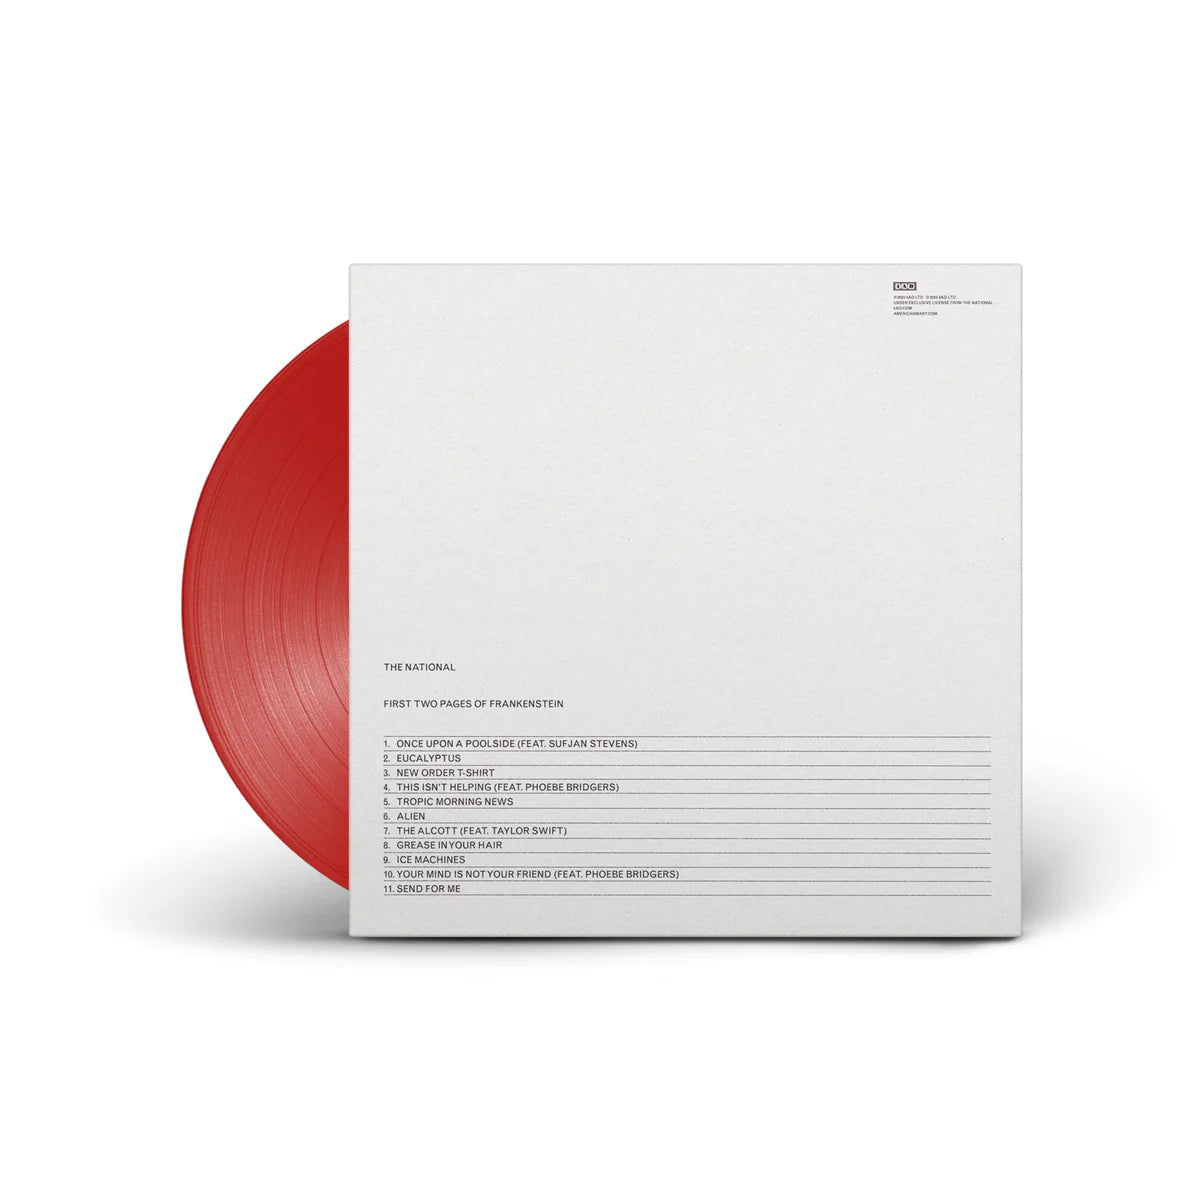 The National - First Two Pages of Frankenstein (Opaque Red Vinyl)